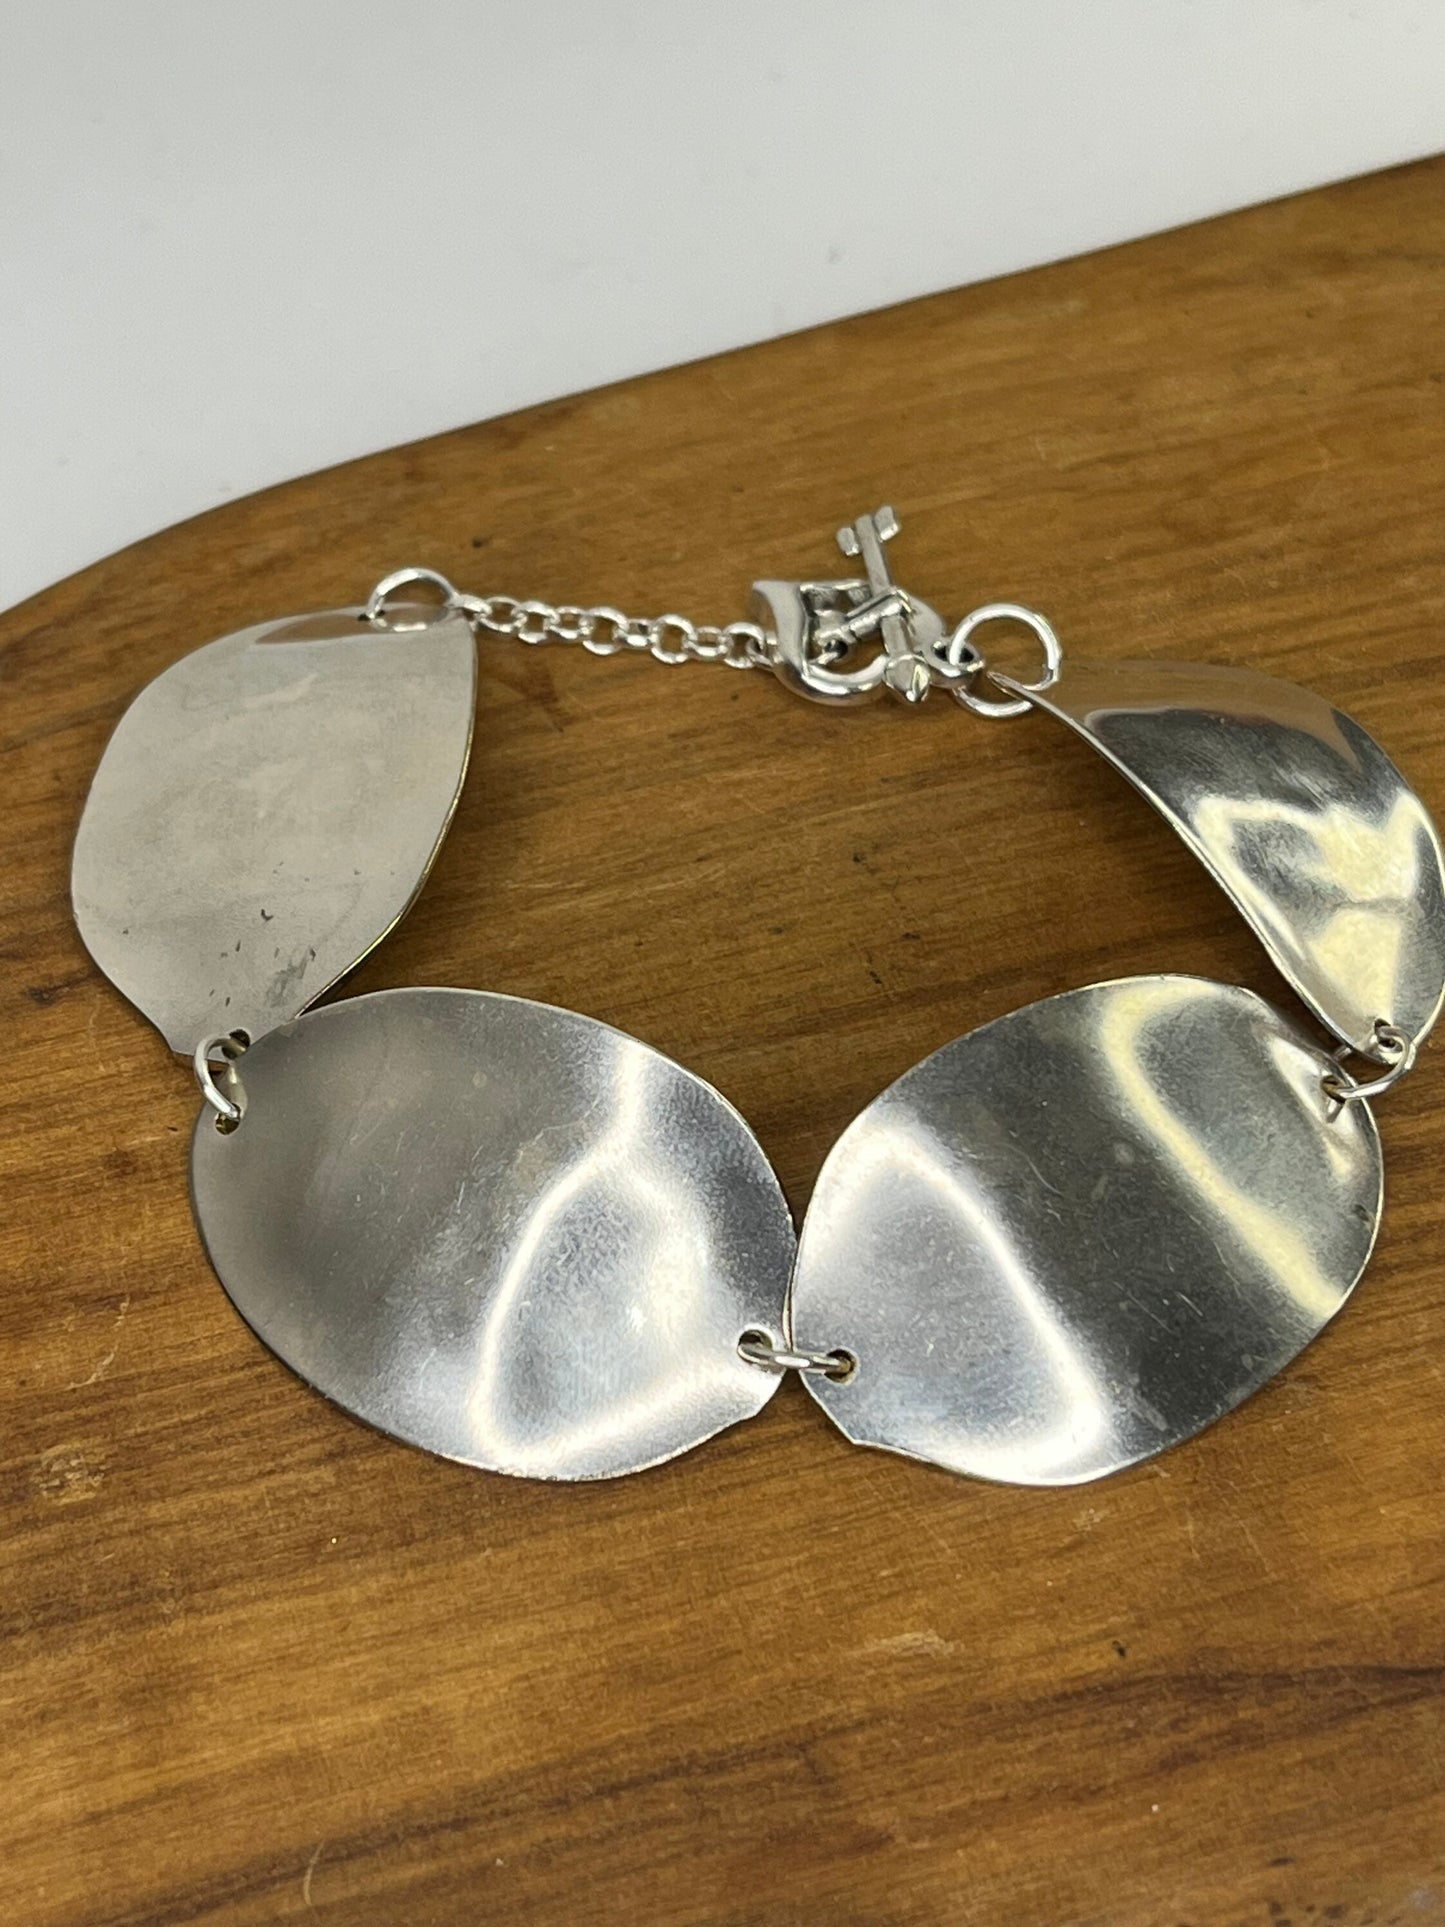 Silver bracelet made from vintage silver plate spoon bowls. Spoon jewelry, Unique and customizable gift for her